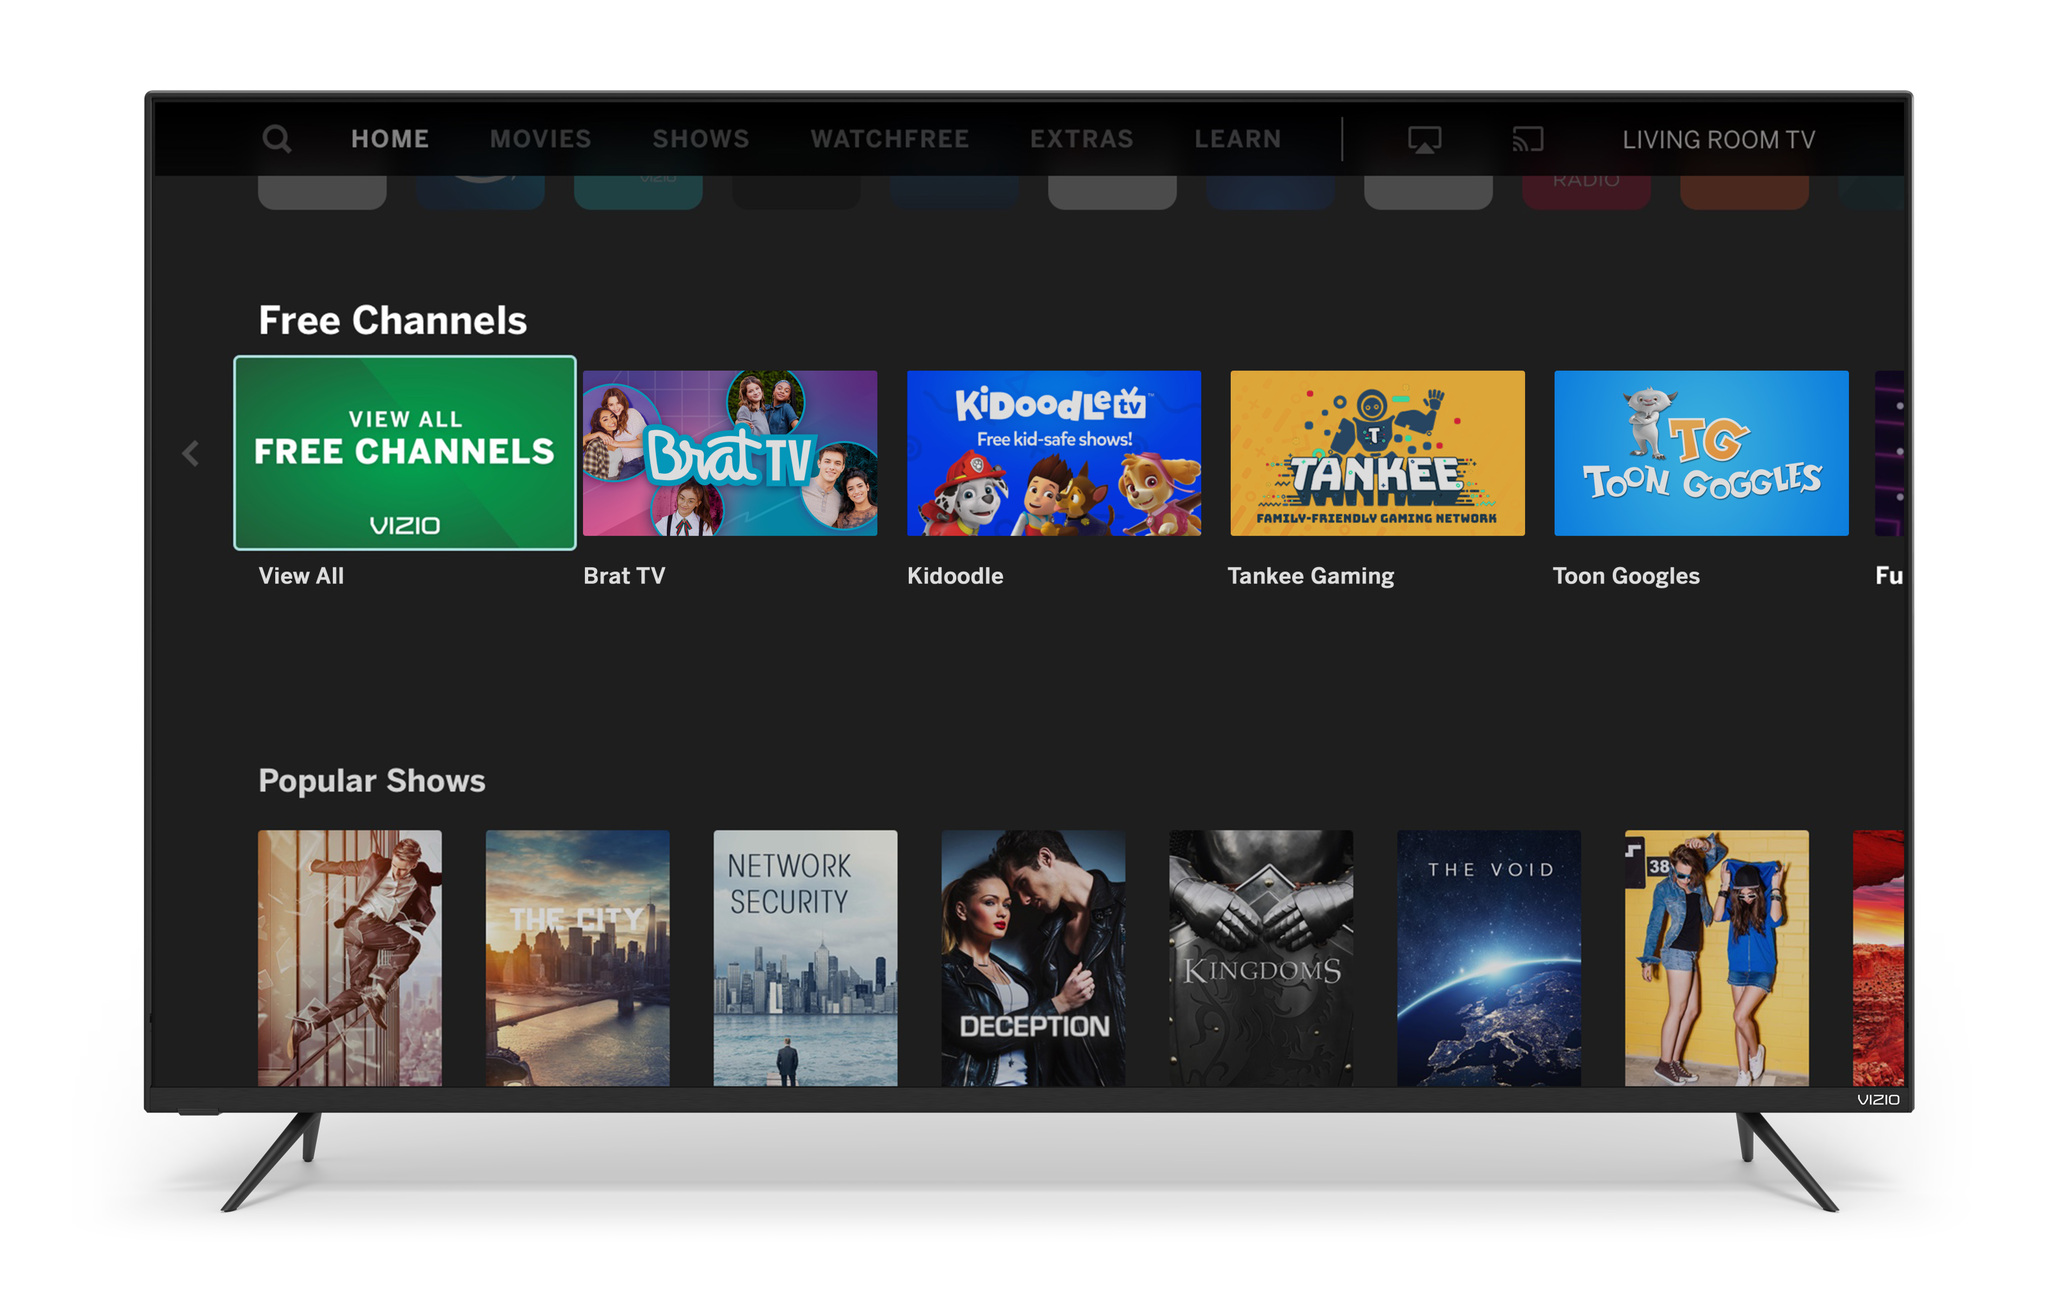 Vizio Adds 12 Channels For Kids To Smartcast Next Tv - how to download roblox on smart tv